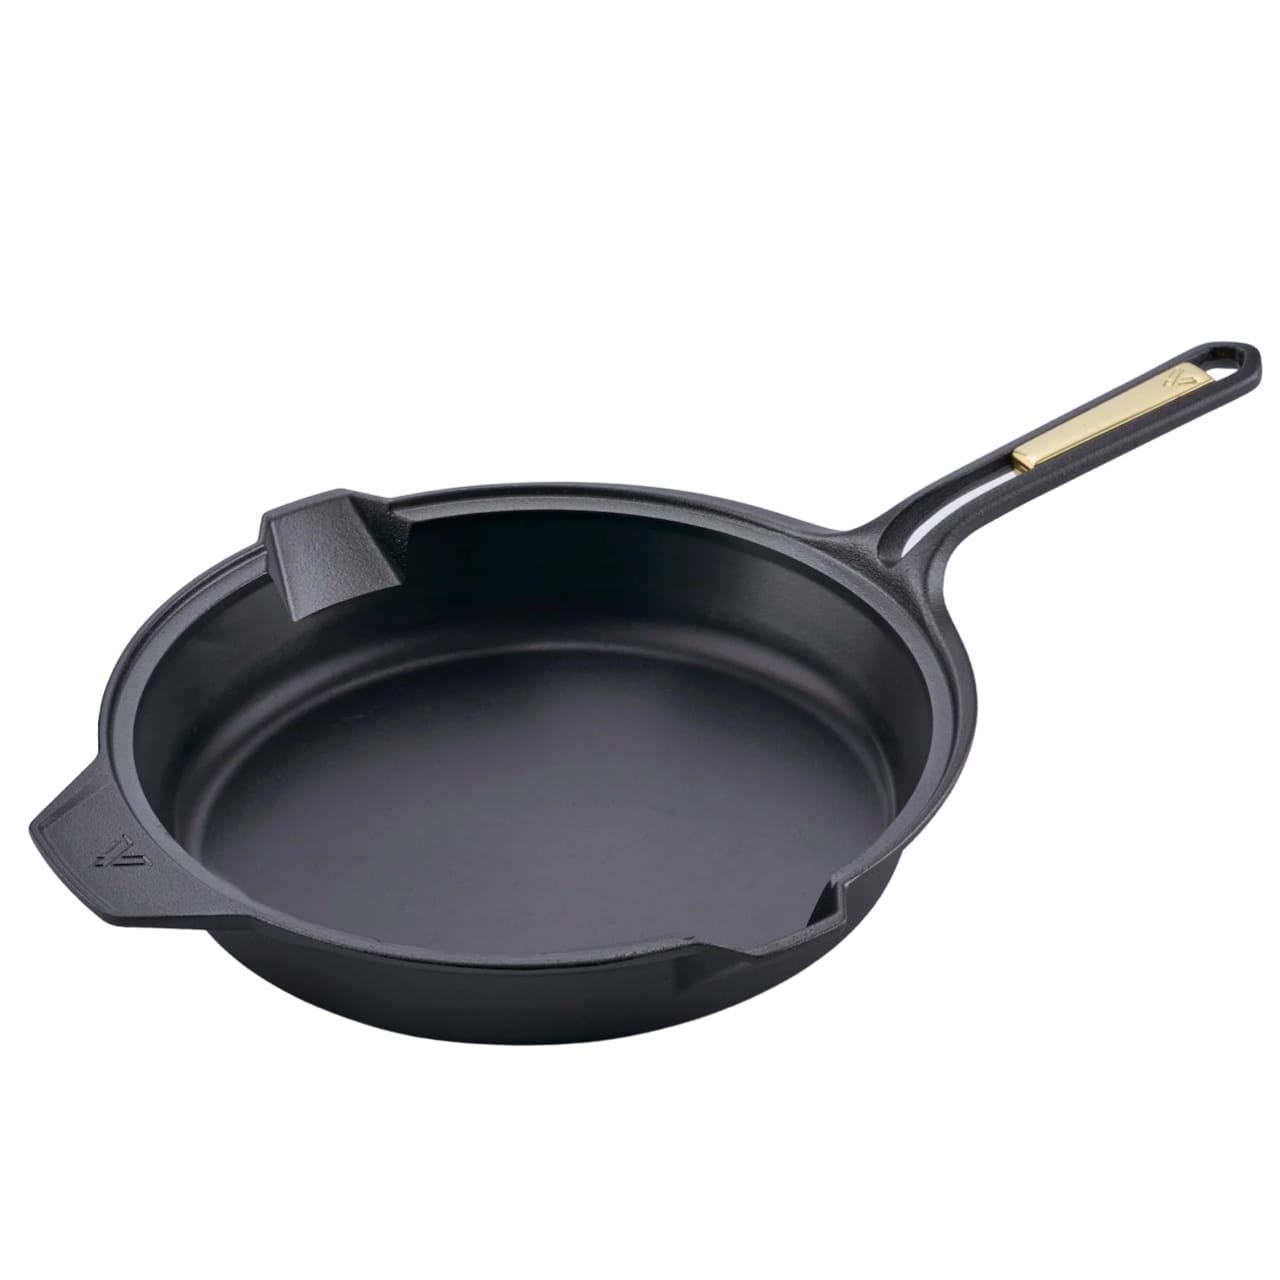 Stargazer Cast Iron Skillet Review (Is It Worth the High Price?)